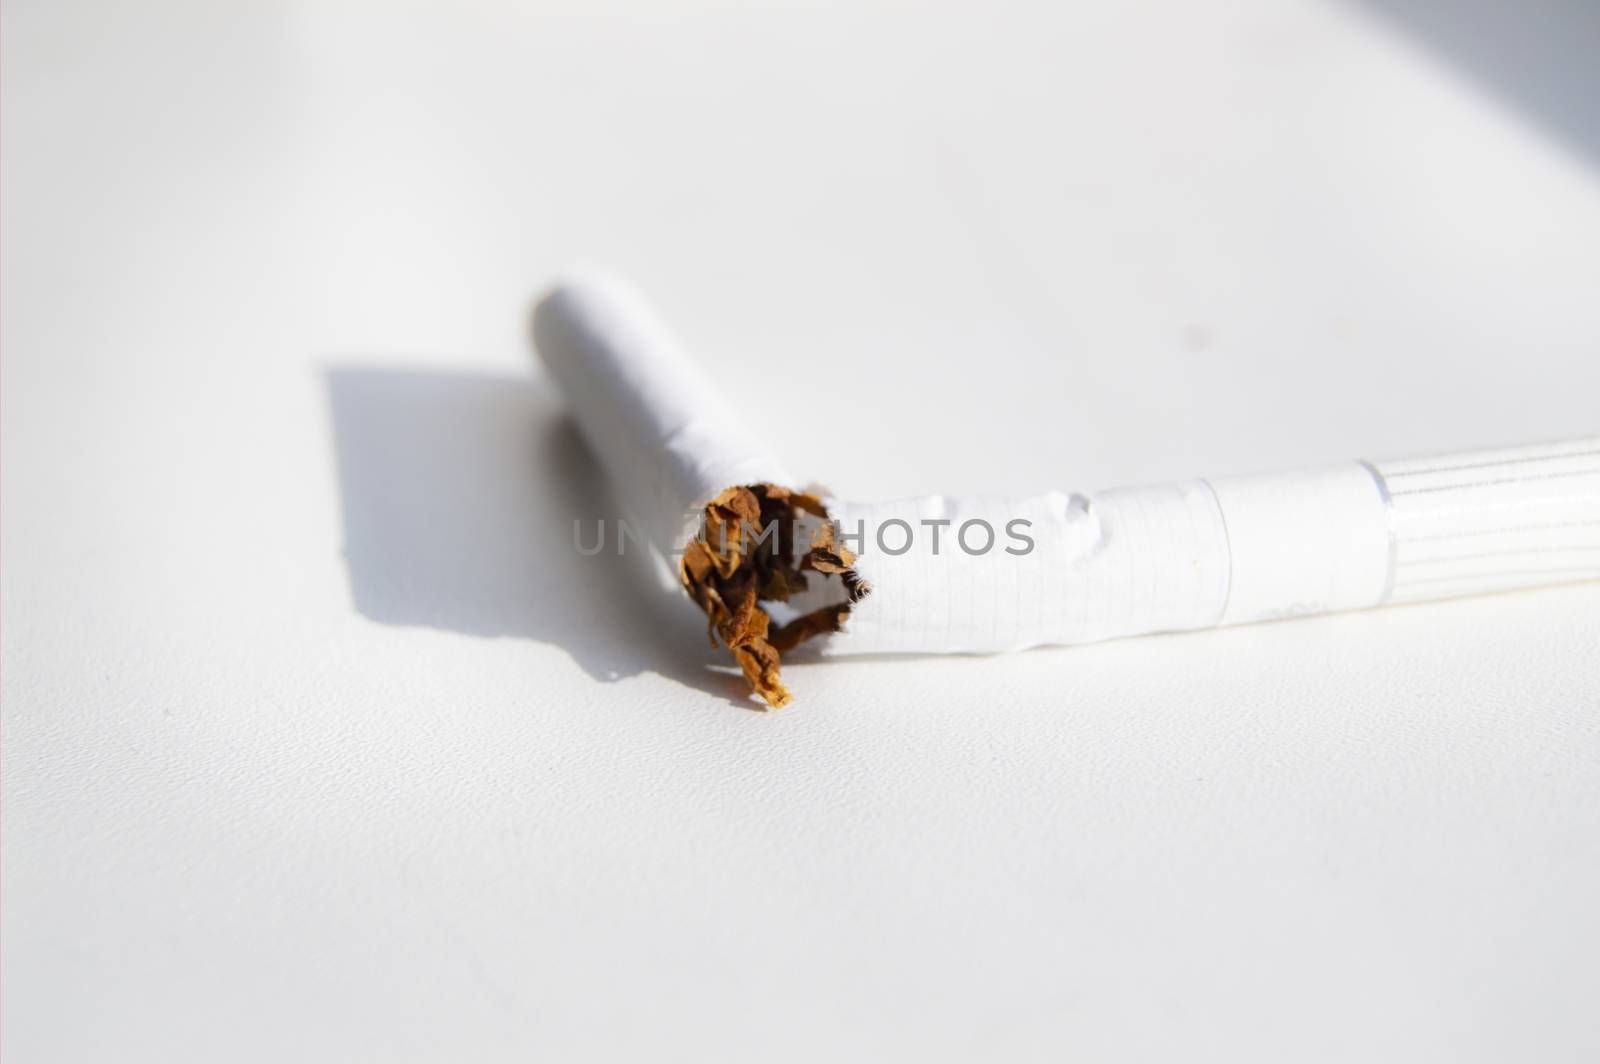 Broken cigarette on white background, Smoking cessation concept, minimalism style, selective focus by claire_lucia